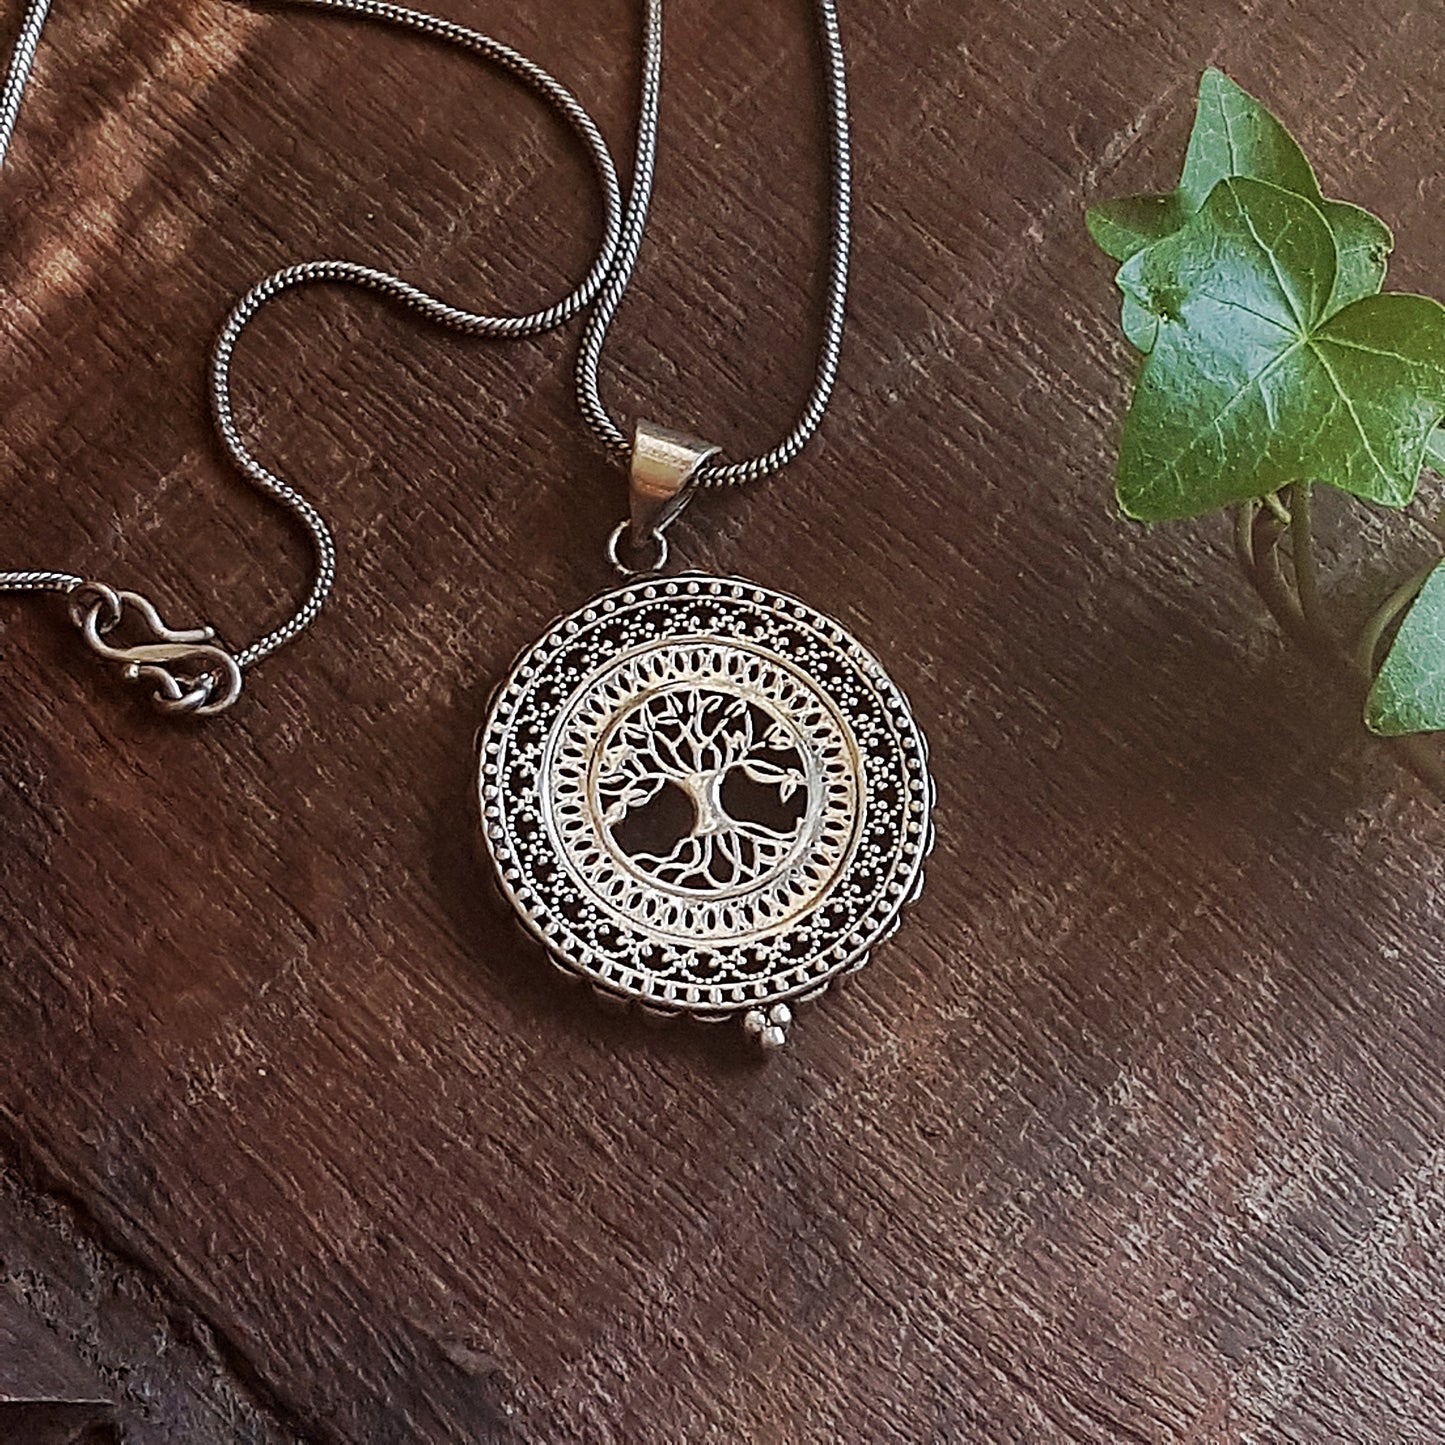 Silver filigree tree of life pendant. Engraved silver disk shape tree pendant necklace. Gender neutral design. 1.75 inch diameter on chain. - Vintage India Ca